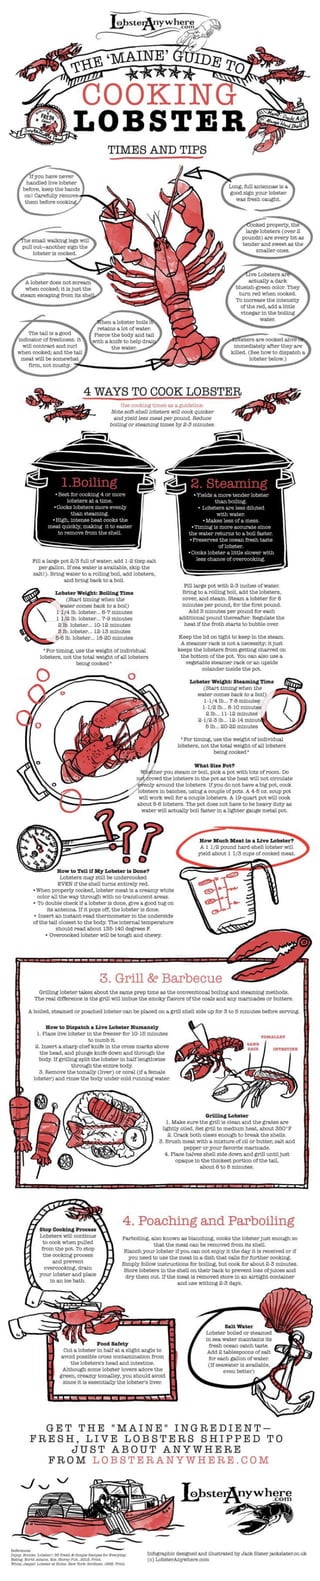 Guide to Cooking Lobsters MAINE Style